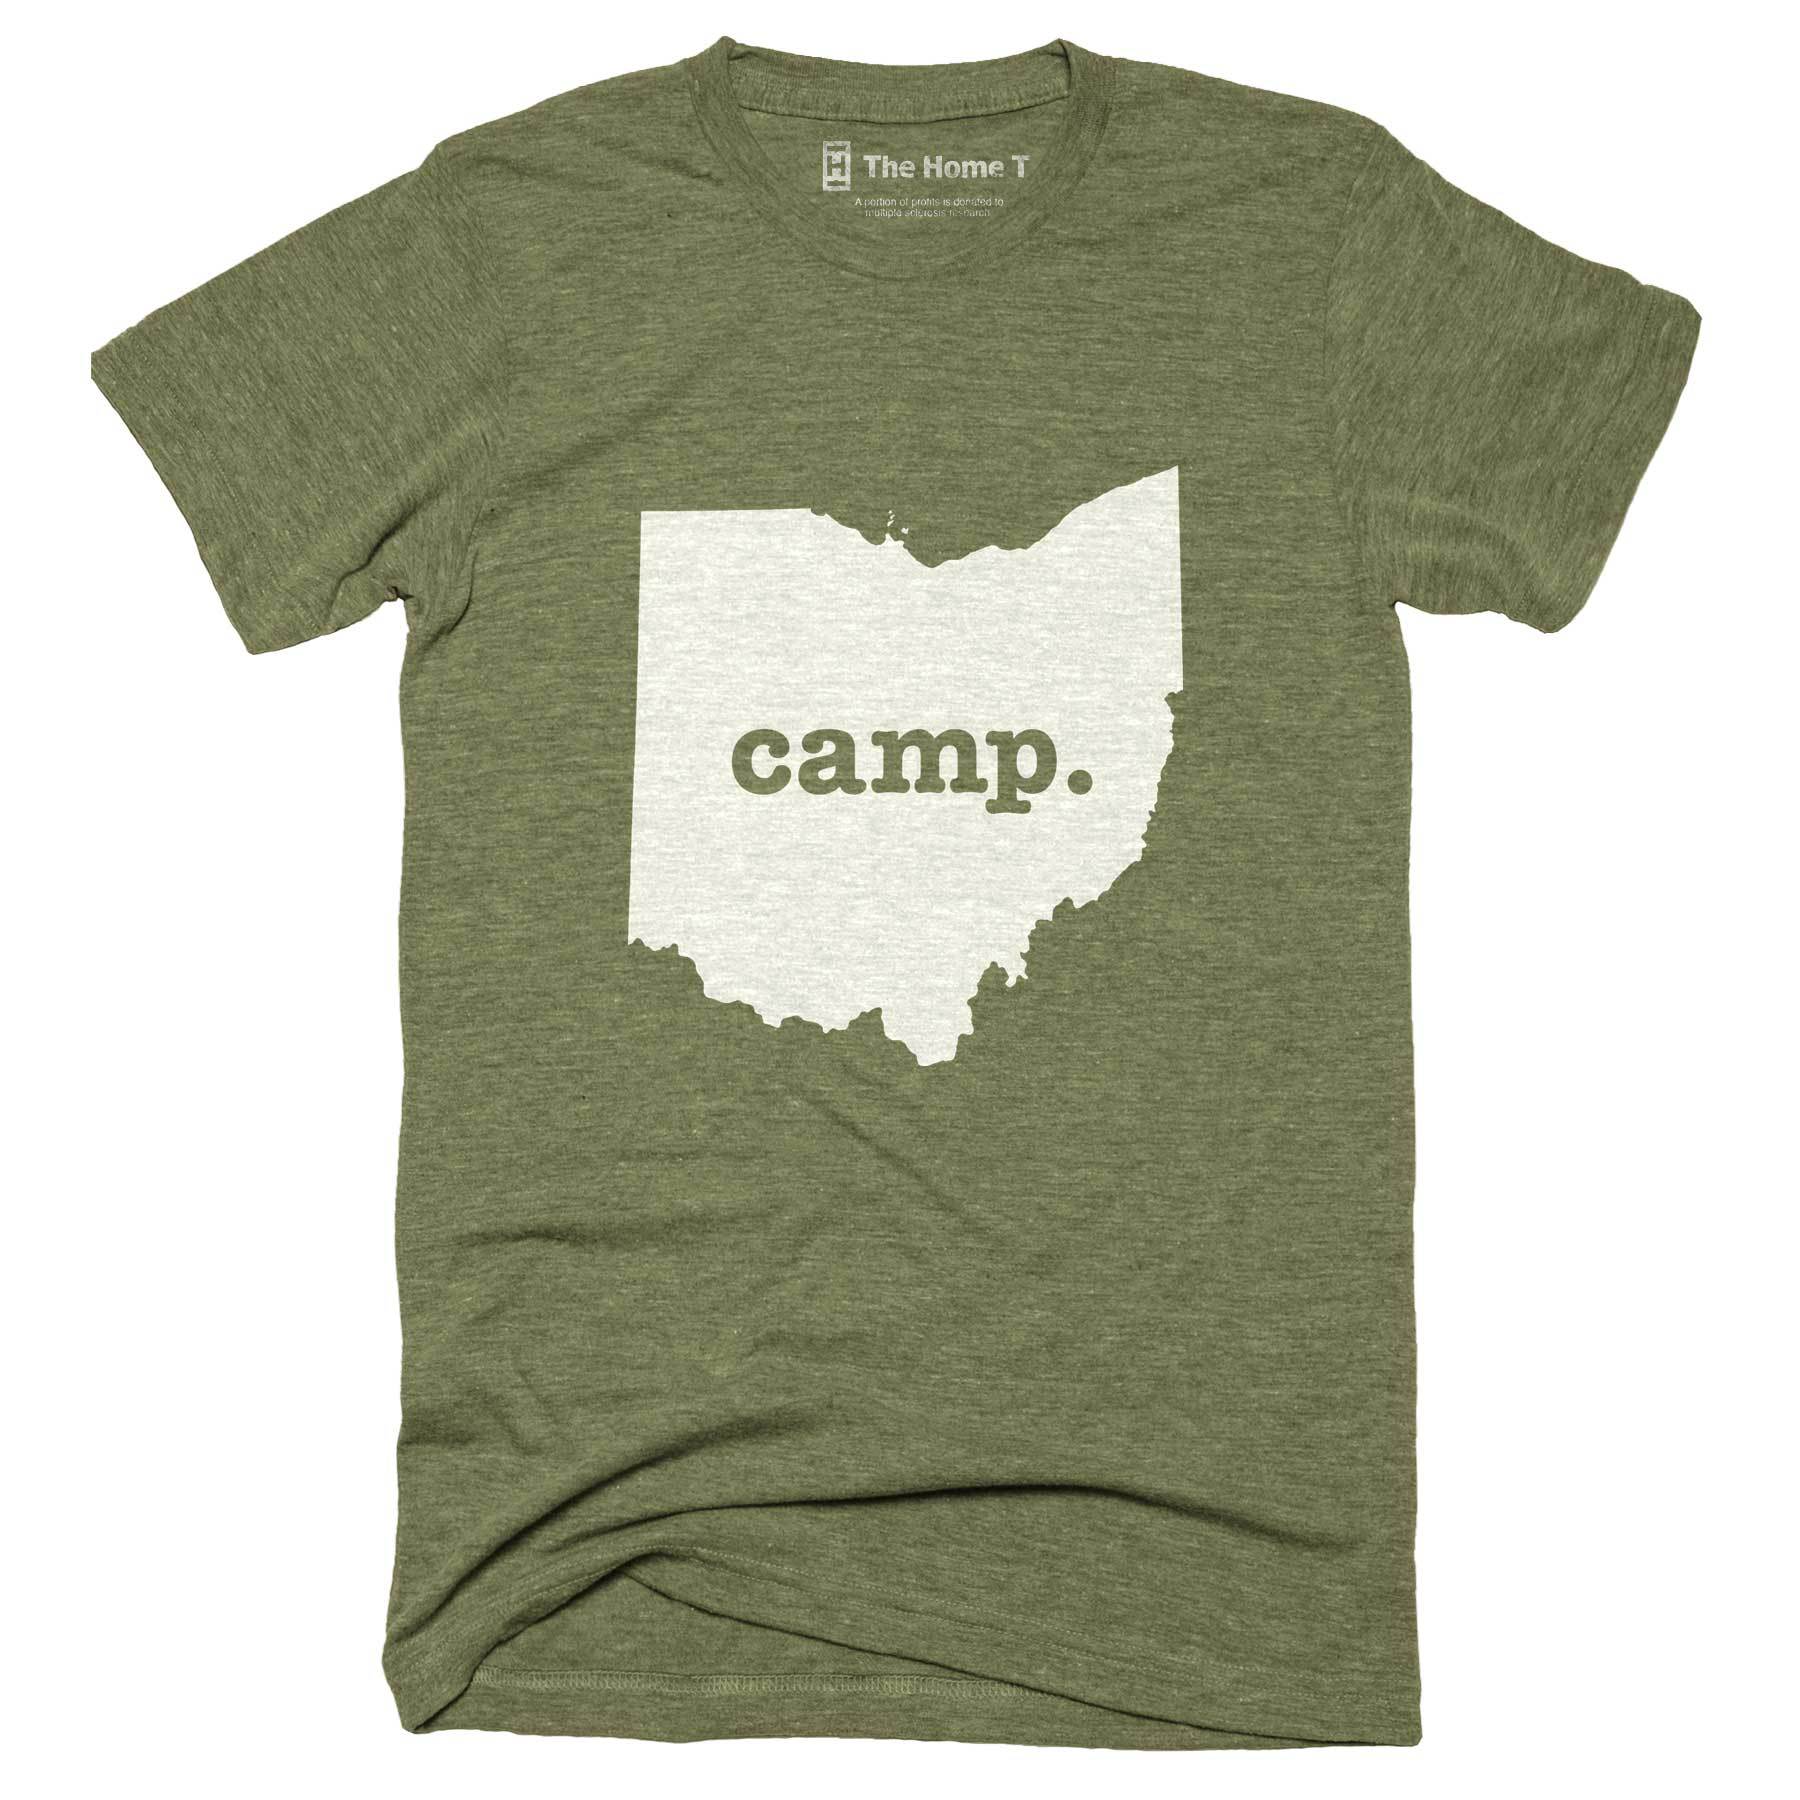 Ohio Camp Home T-Shirt Outdoor Collection The Home T XXL Army Green